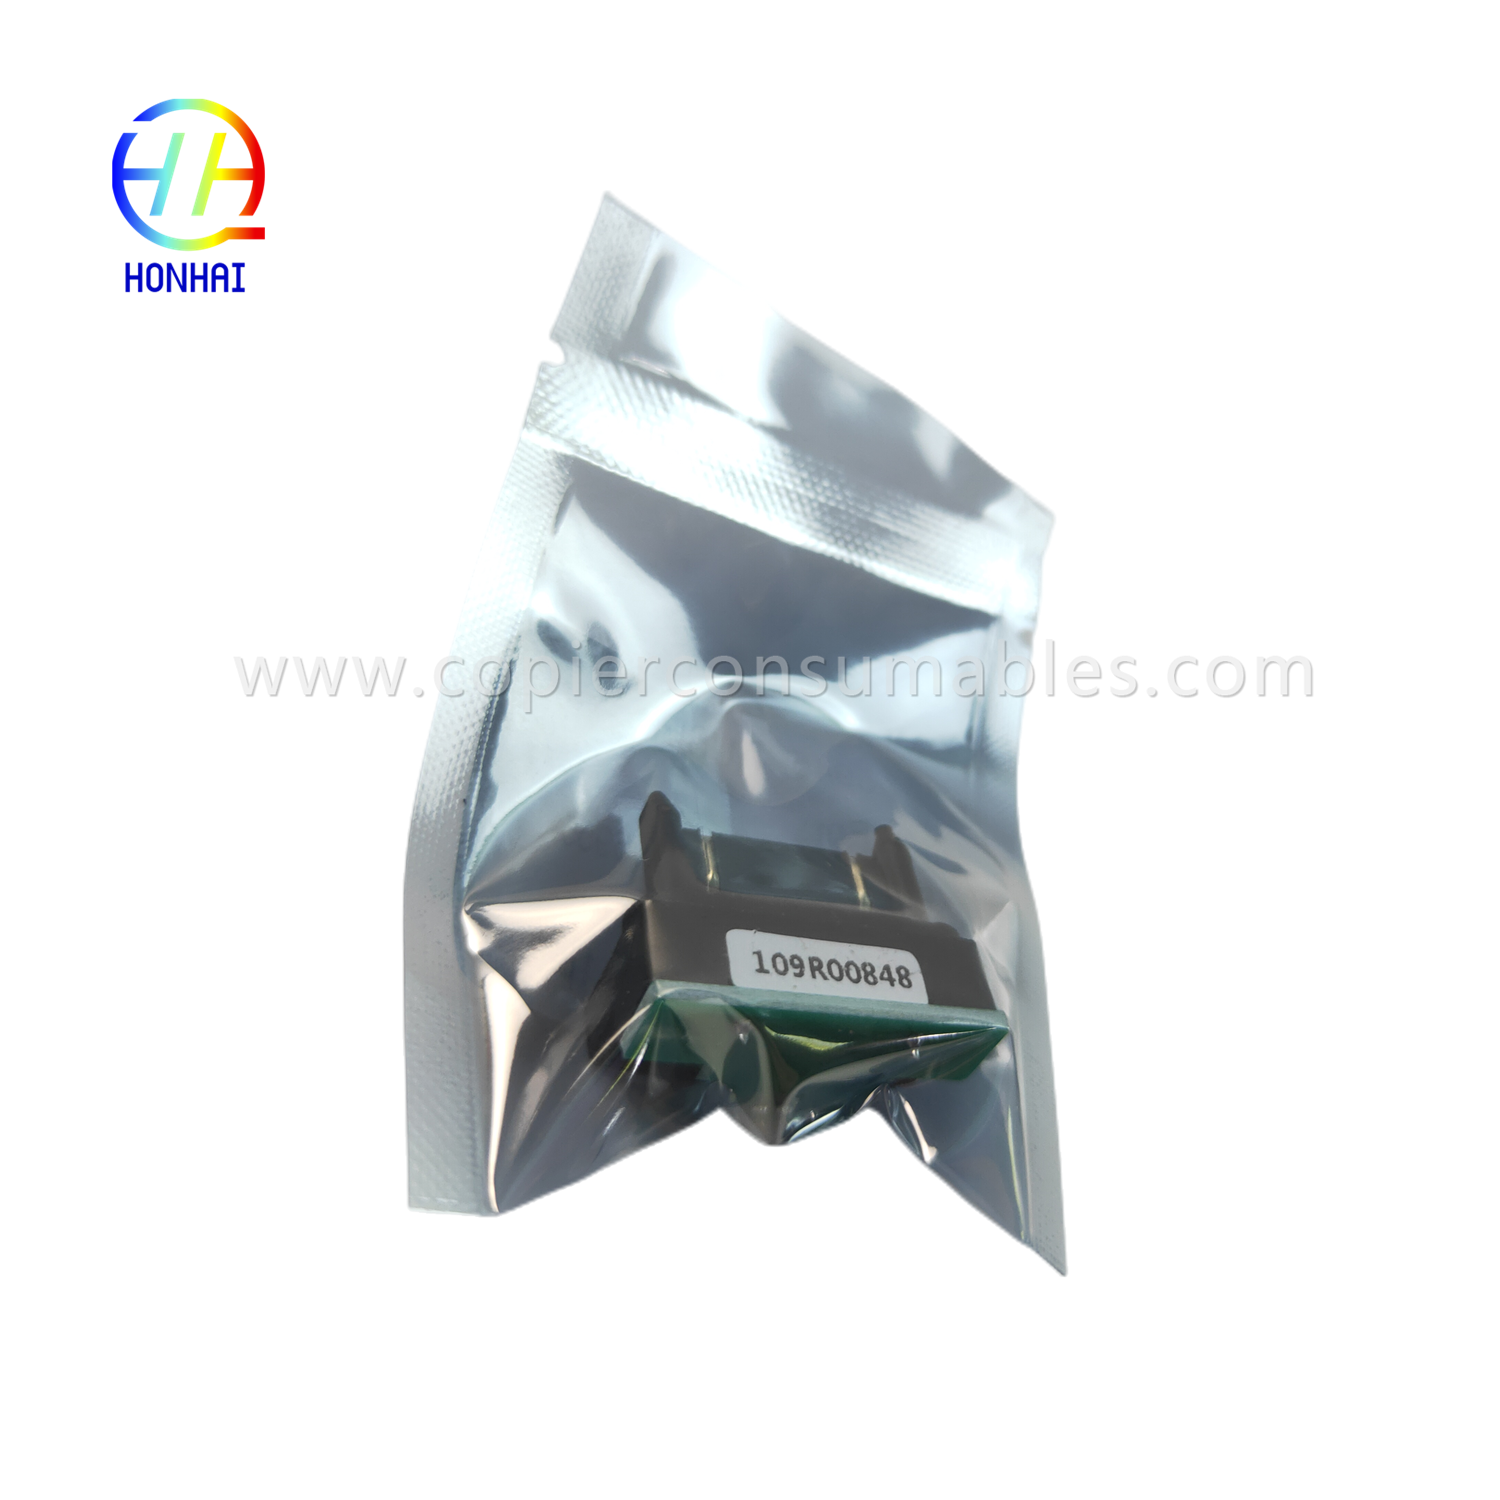 Fuser chip ye xerox workcentre 5945 5955 109R00848 chip (5)_副本